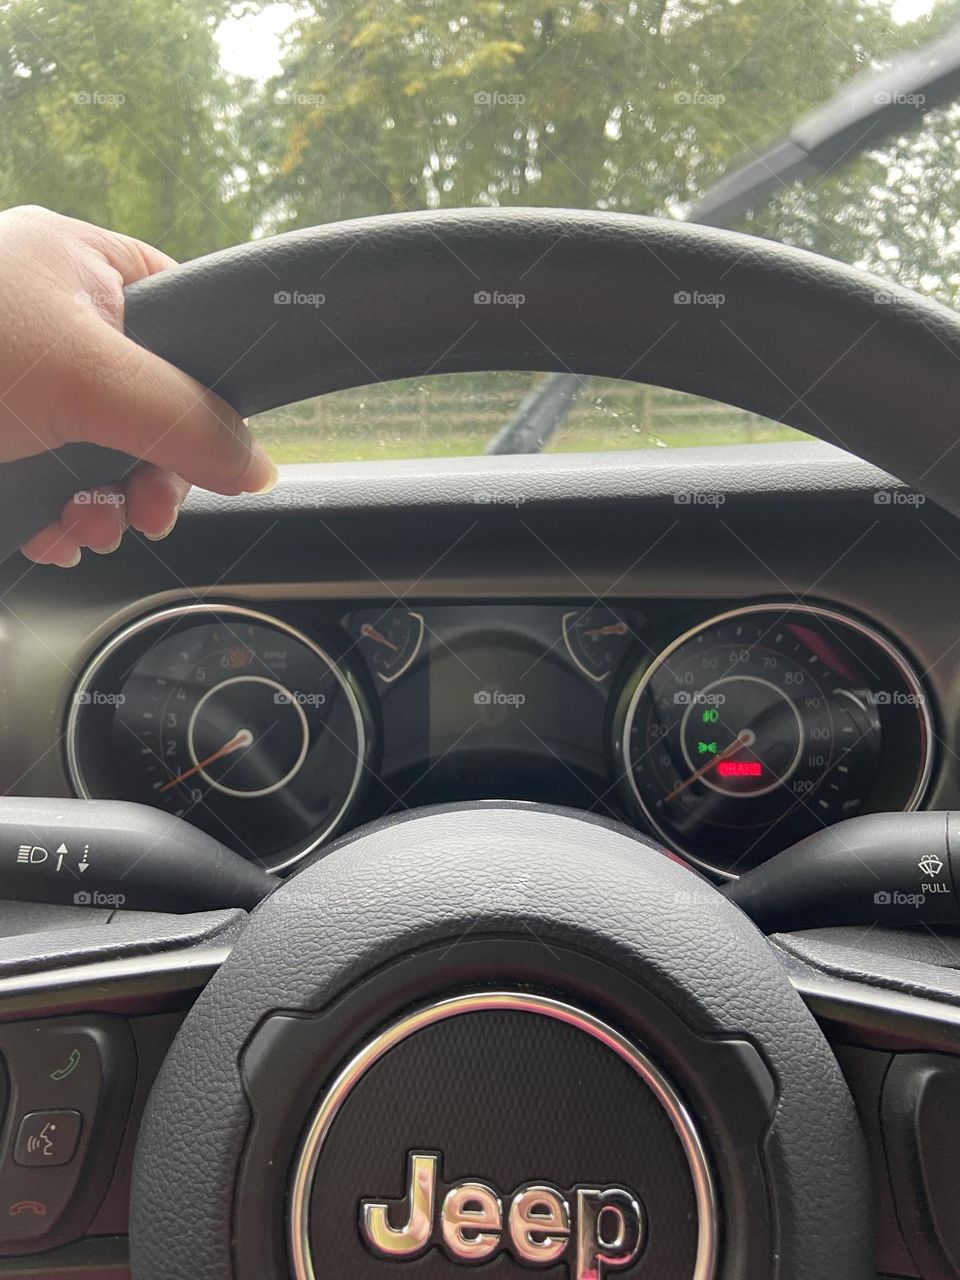 My hand on the steering wheel of my Jeep looking out at the trees across the way on a recent cloudy and rainy day at a nearby park. It had just started to drizzle so I turned on my windshield wipers. 